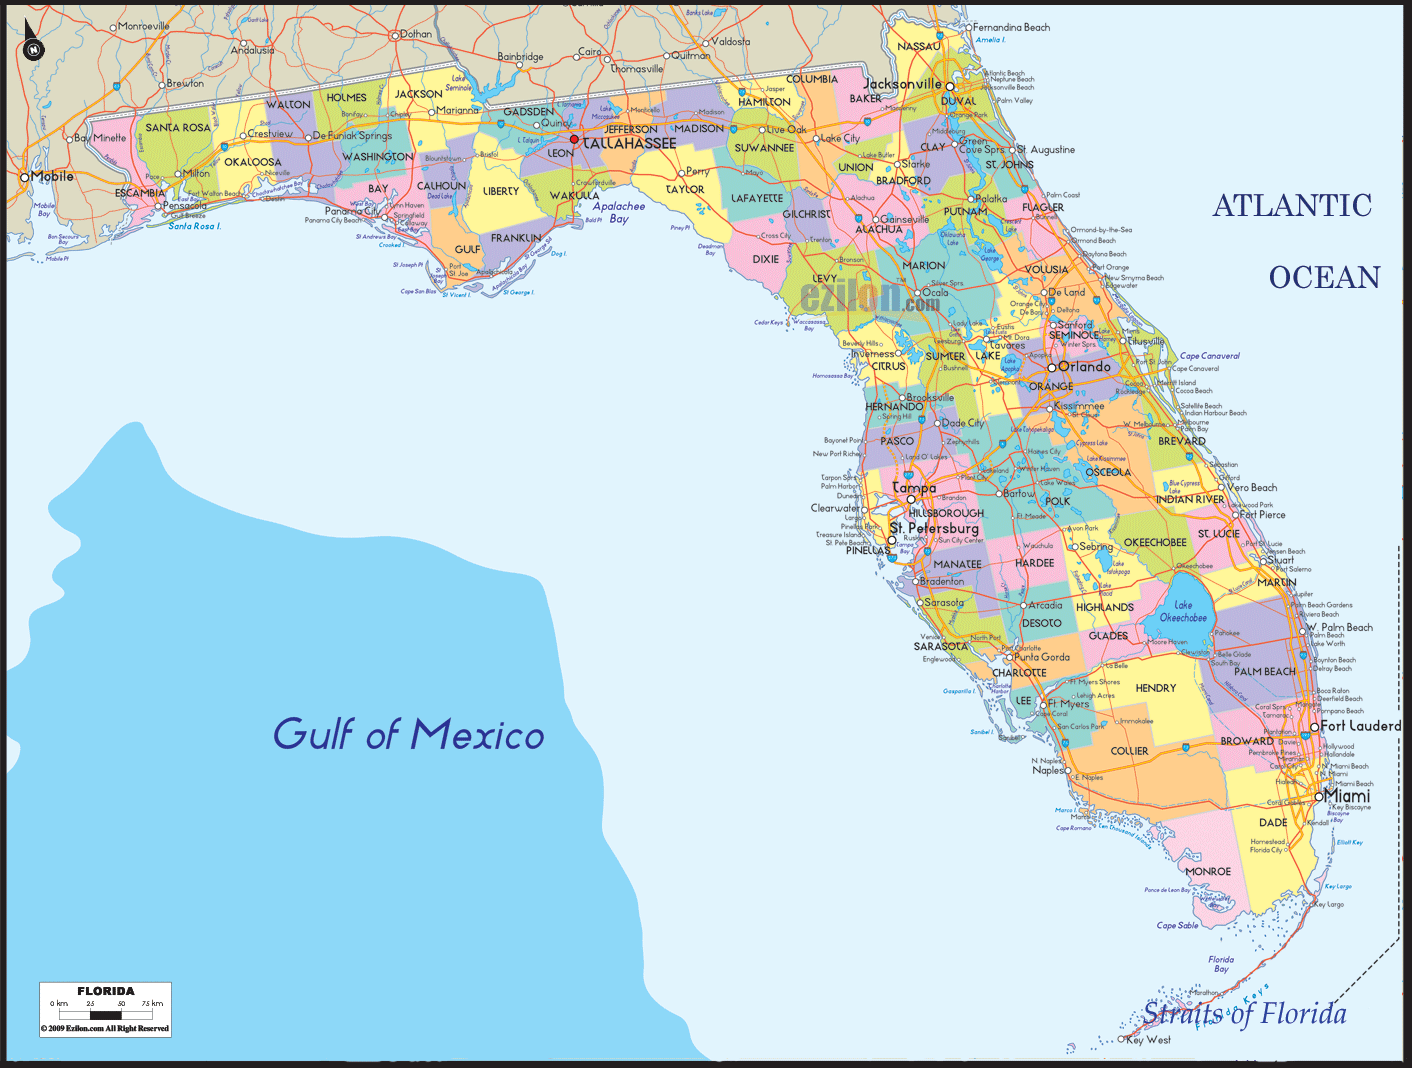 Political division of the state of Florida by county. Cities, towns